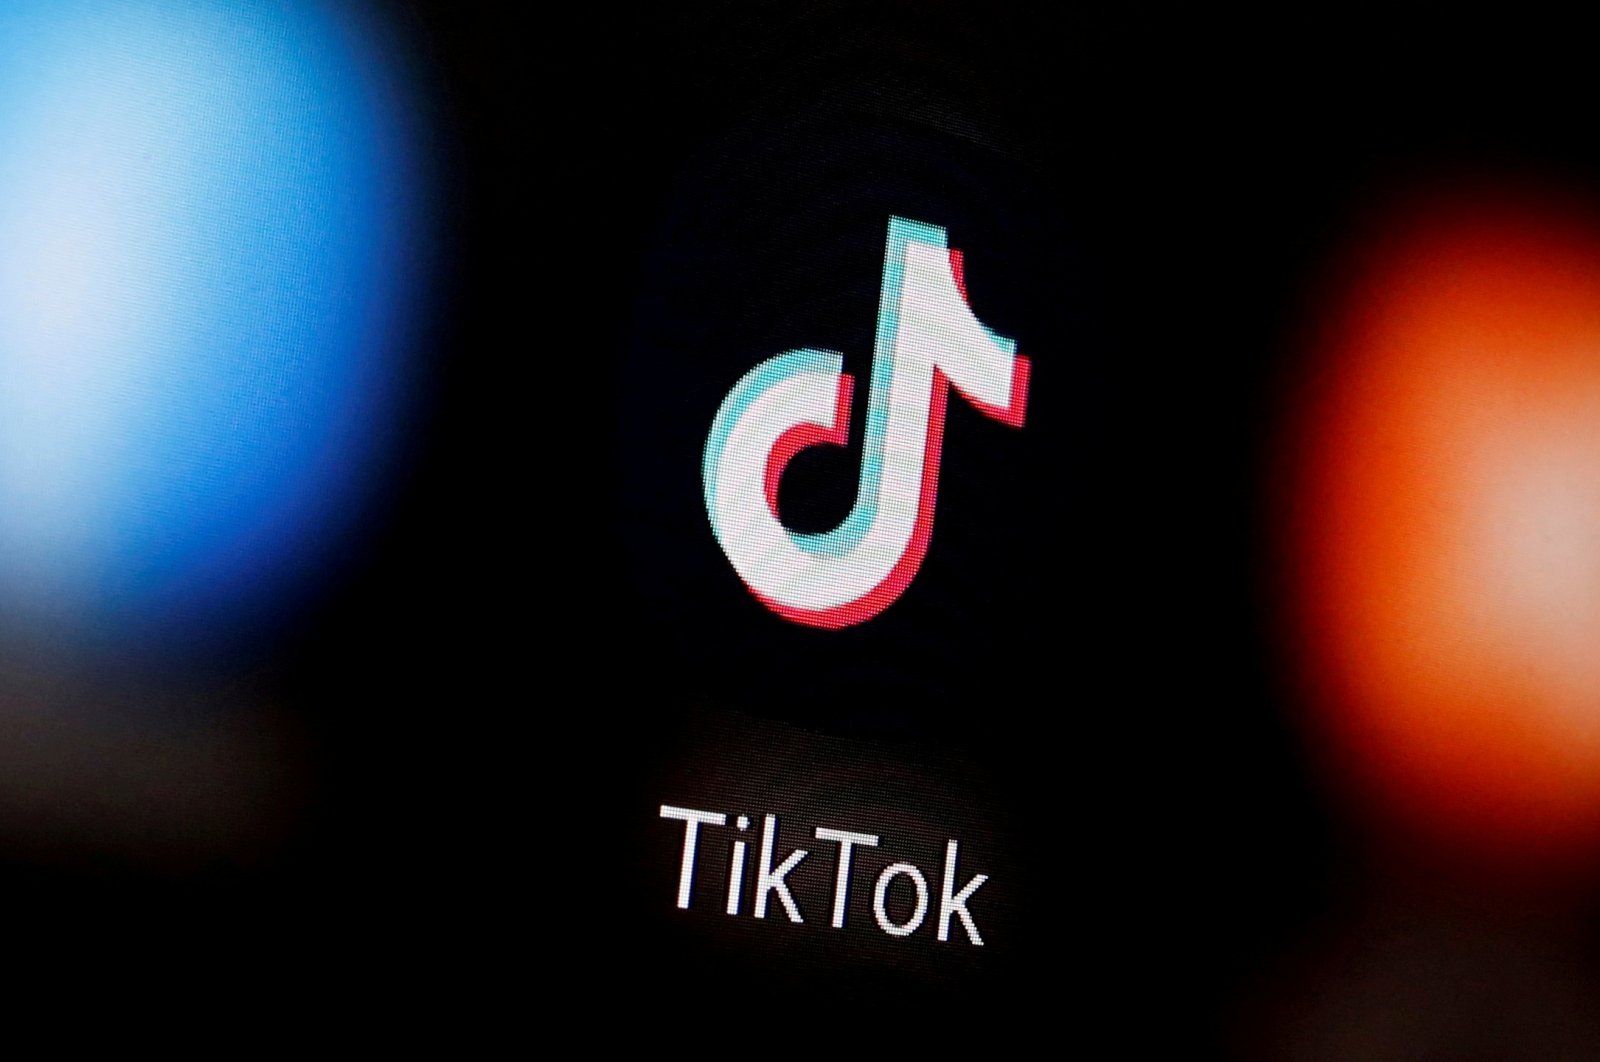 A TikTok logo is displayed on a smartphone in this illustration taken Jan. 6, 2020. (Reuters Photo)